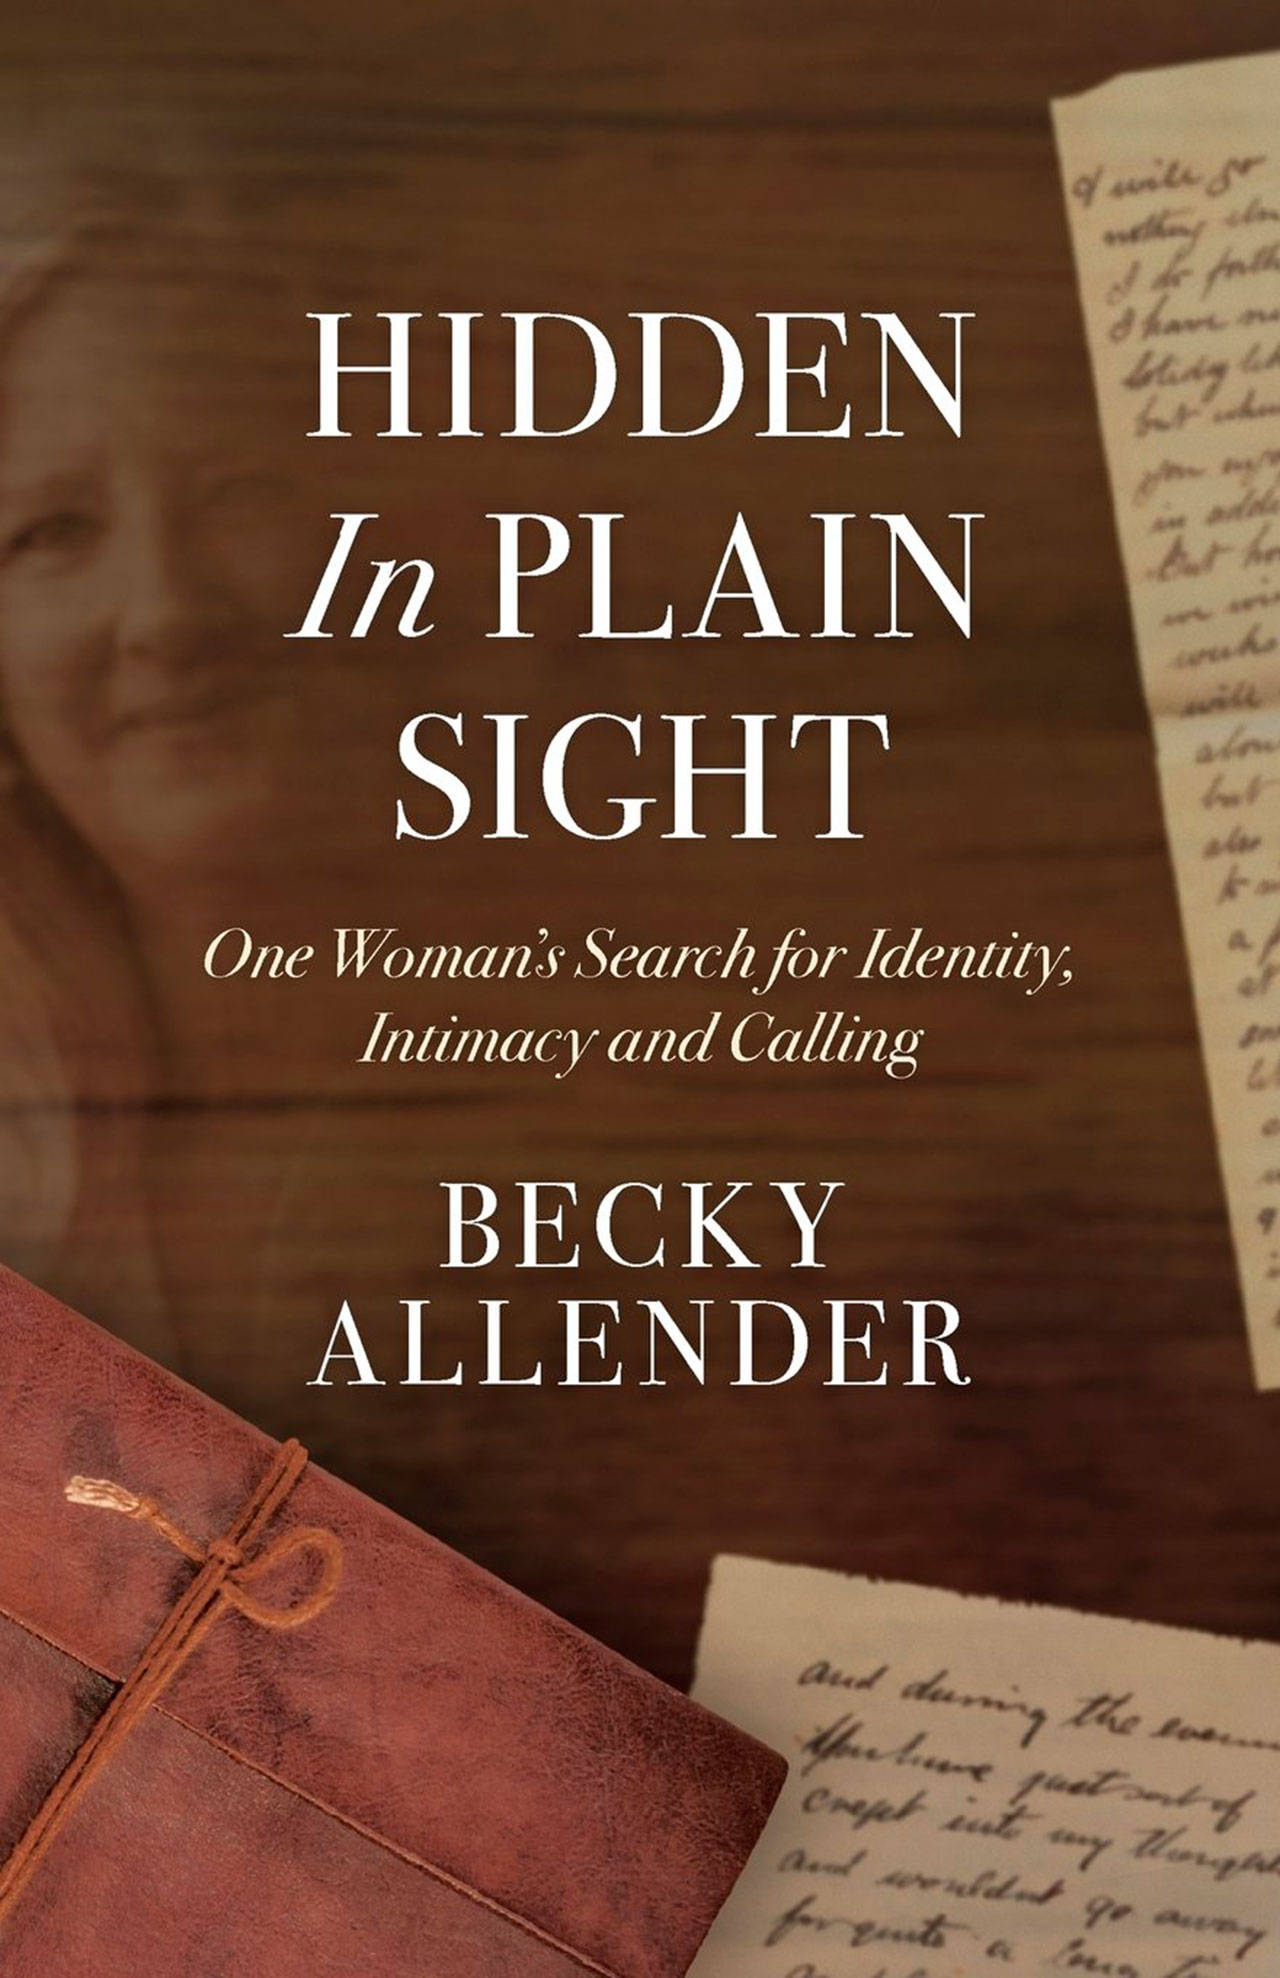 Image courtesy of Eagle Harbor Book Company | Bainbridge-based author and educator Becky Allender will visit Eagle Harbor Books and talk about her new book “Hidden in Plain Sight: One Woman’s Search for Identity, Intimacy and Calling” at 3 p.m. Sunday, March 4.